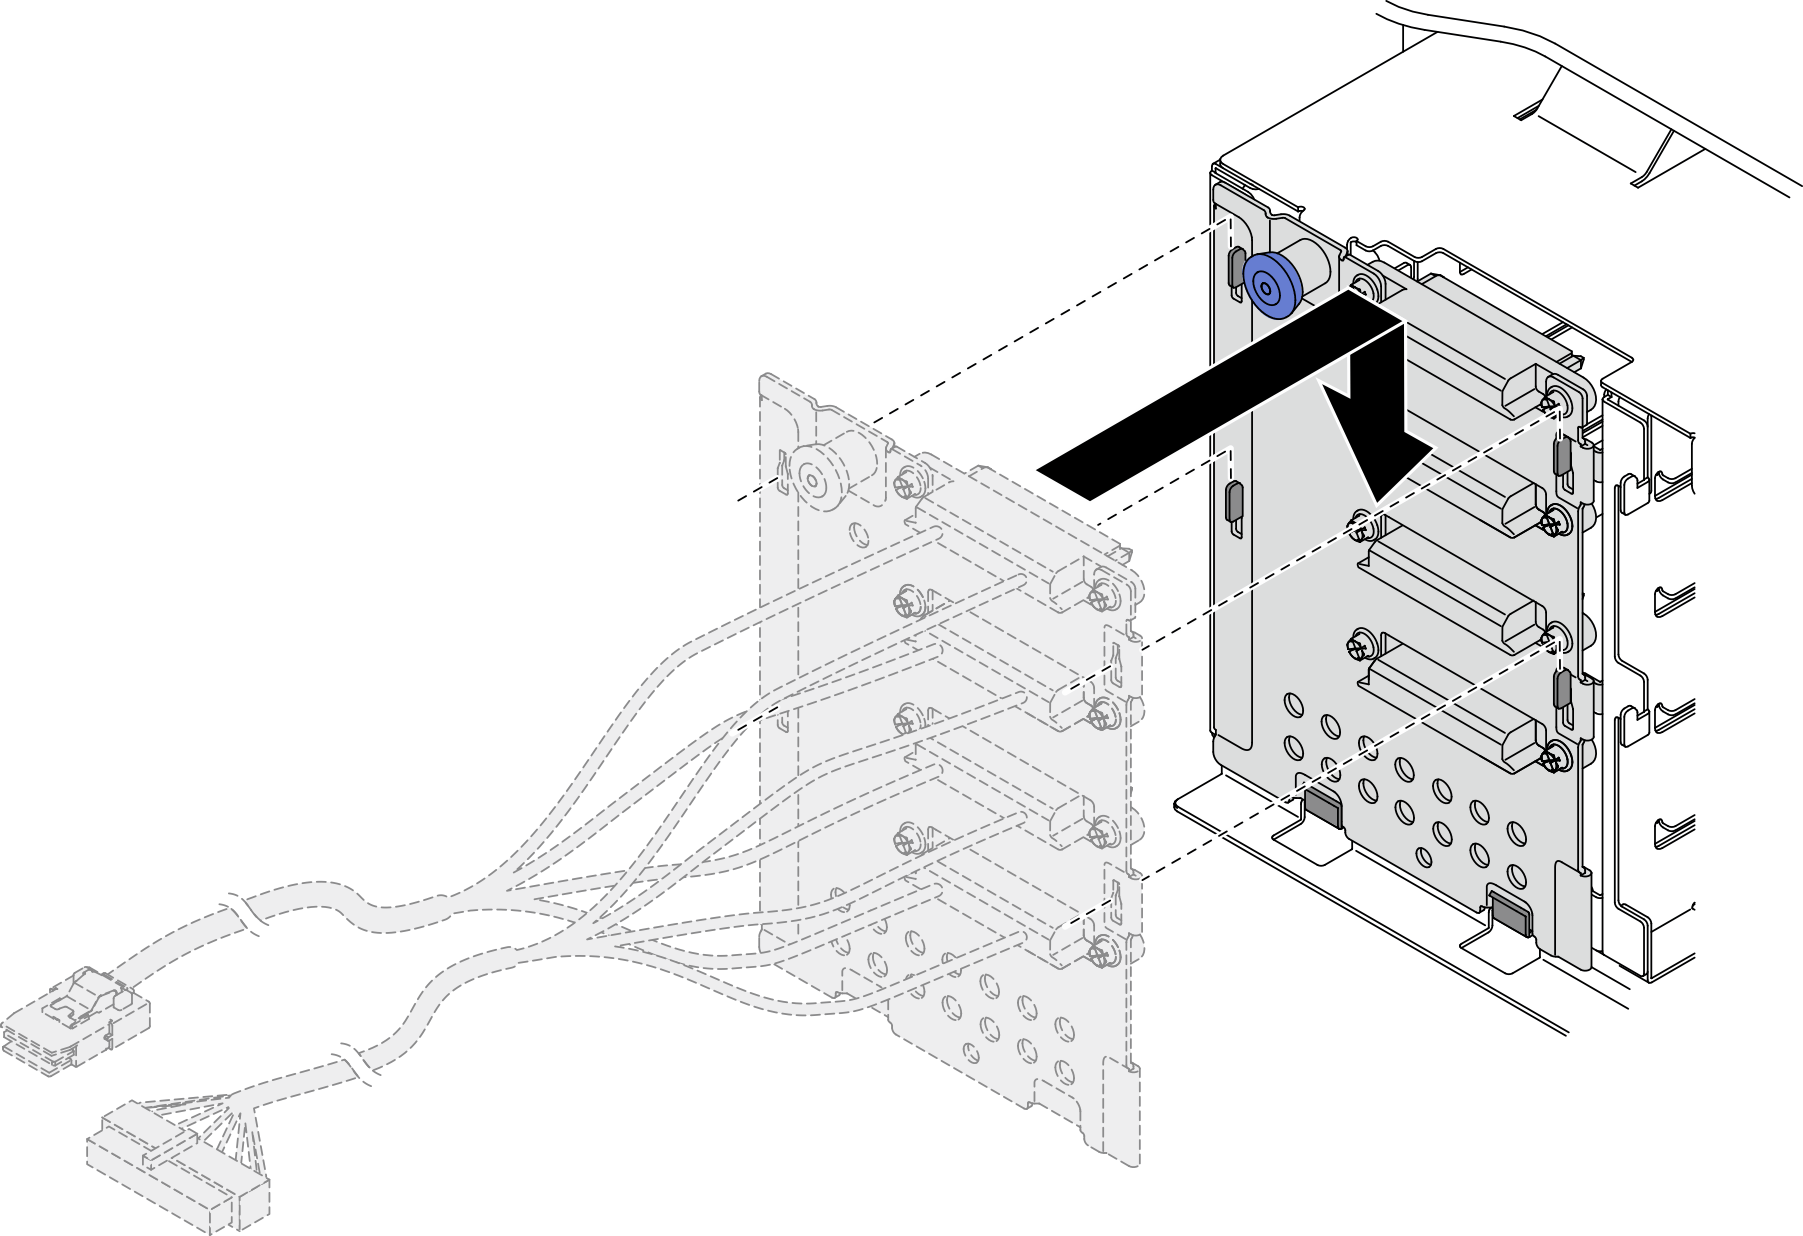 Installation of the 3.5-inch hot-swap drive backplate